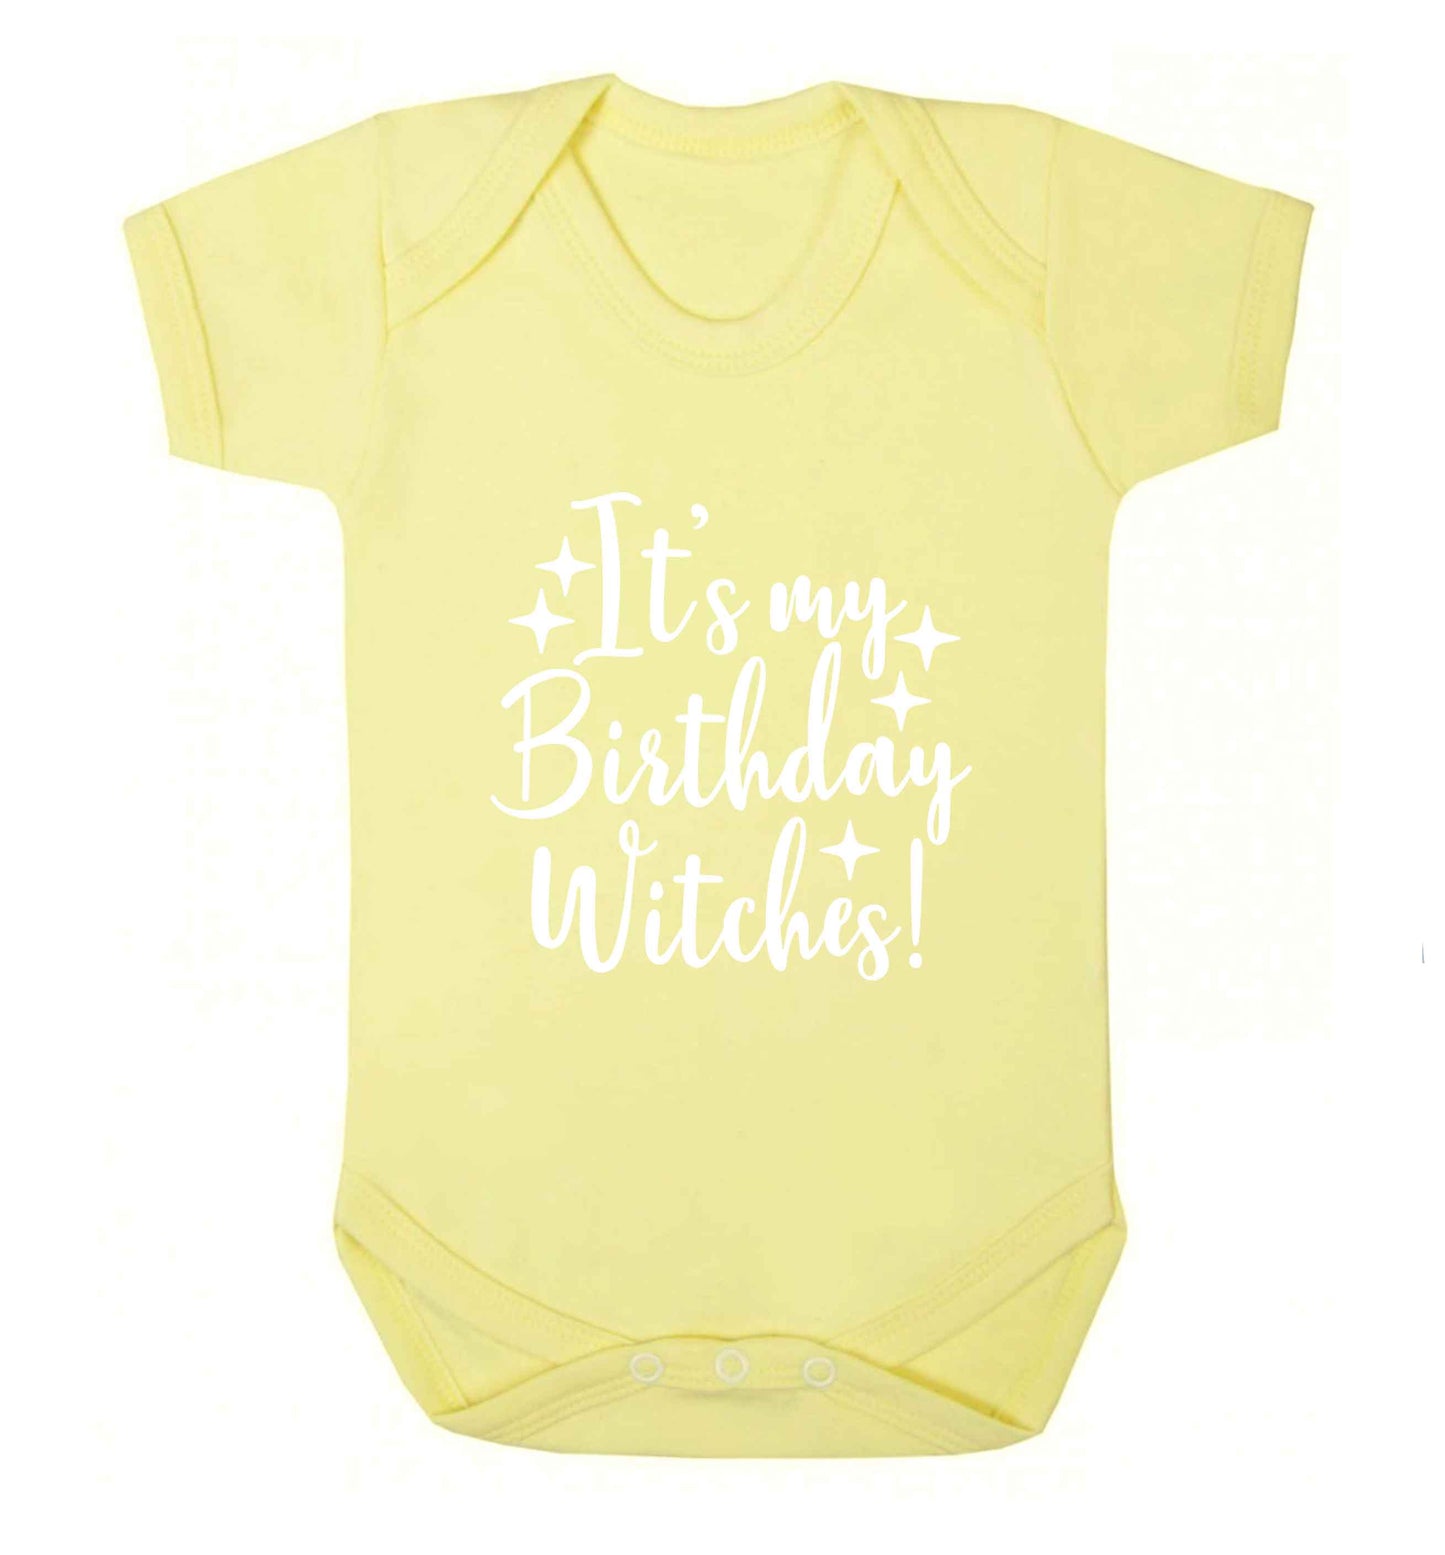 It's my birthday witches!baby vest pale yellow 18-24 months